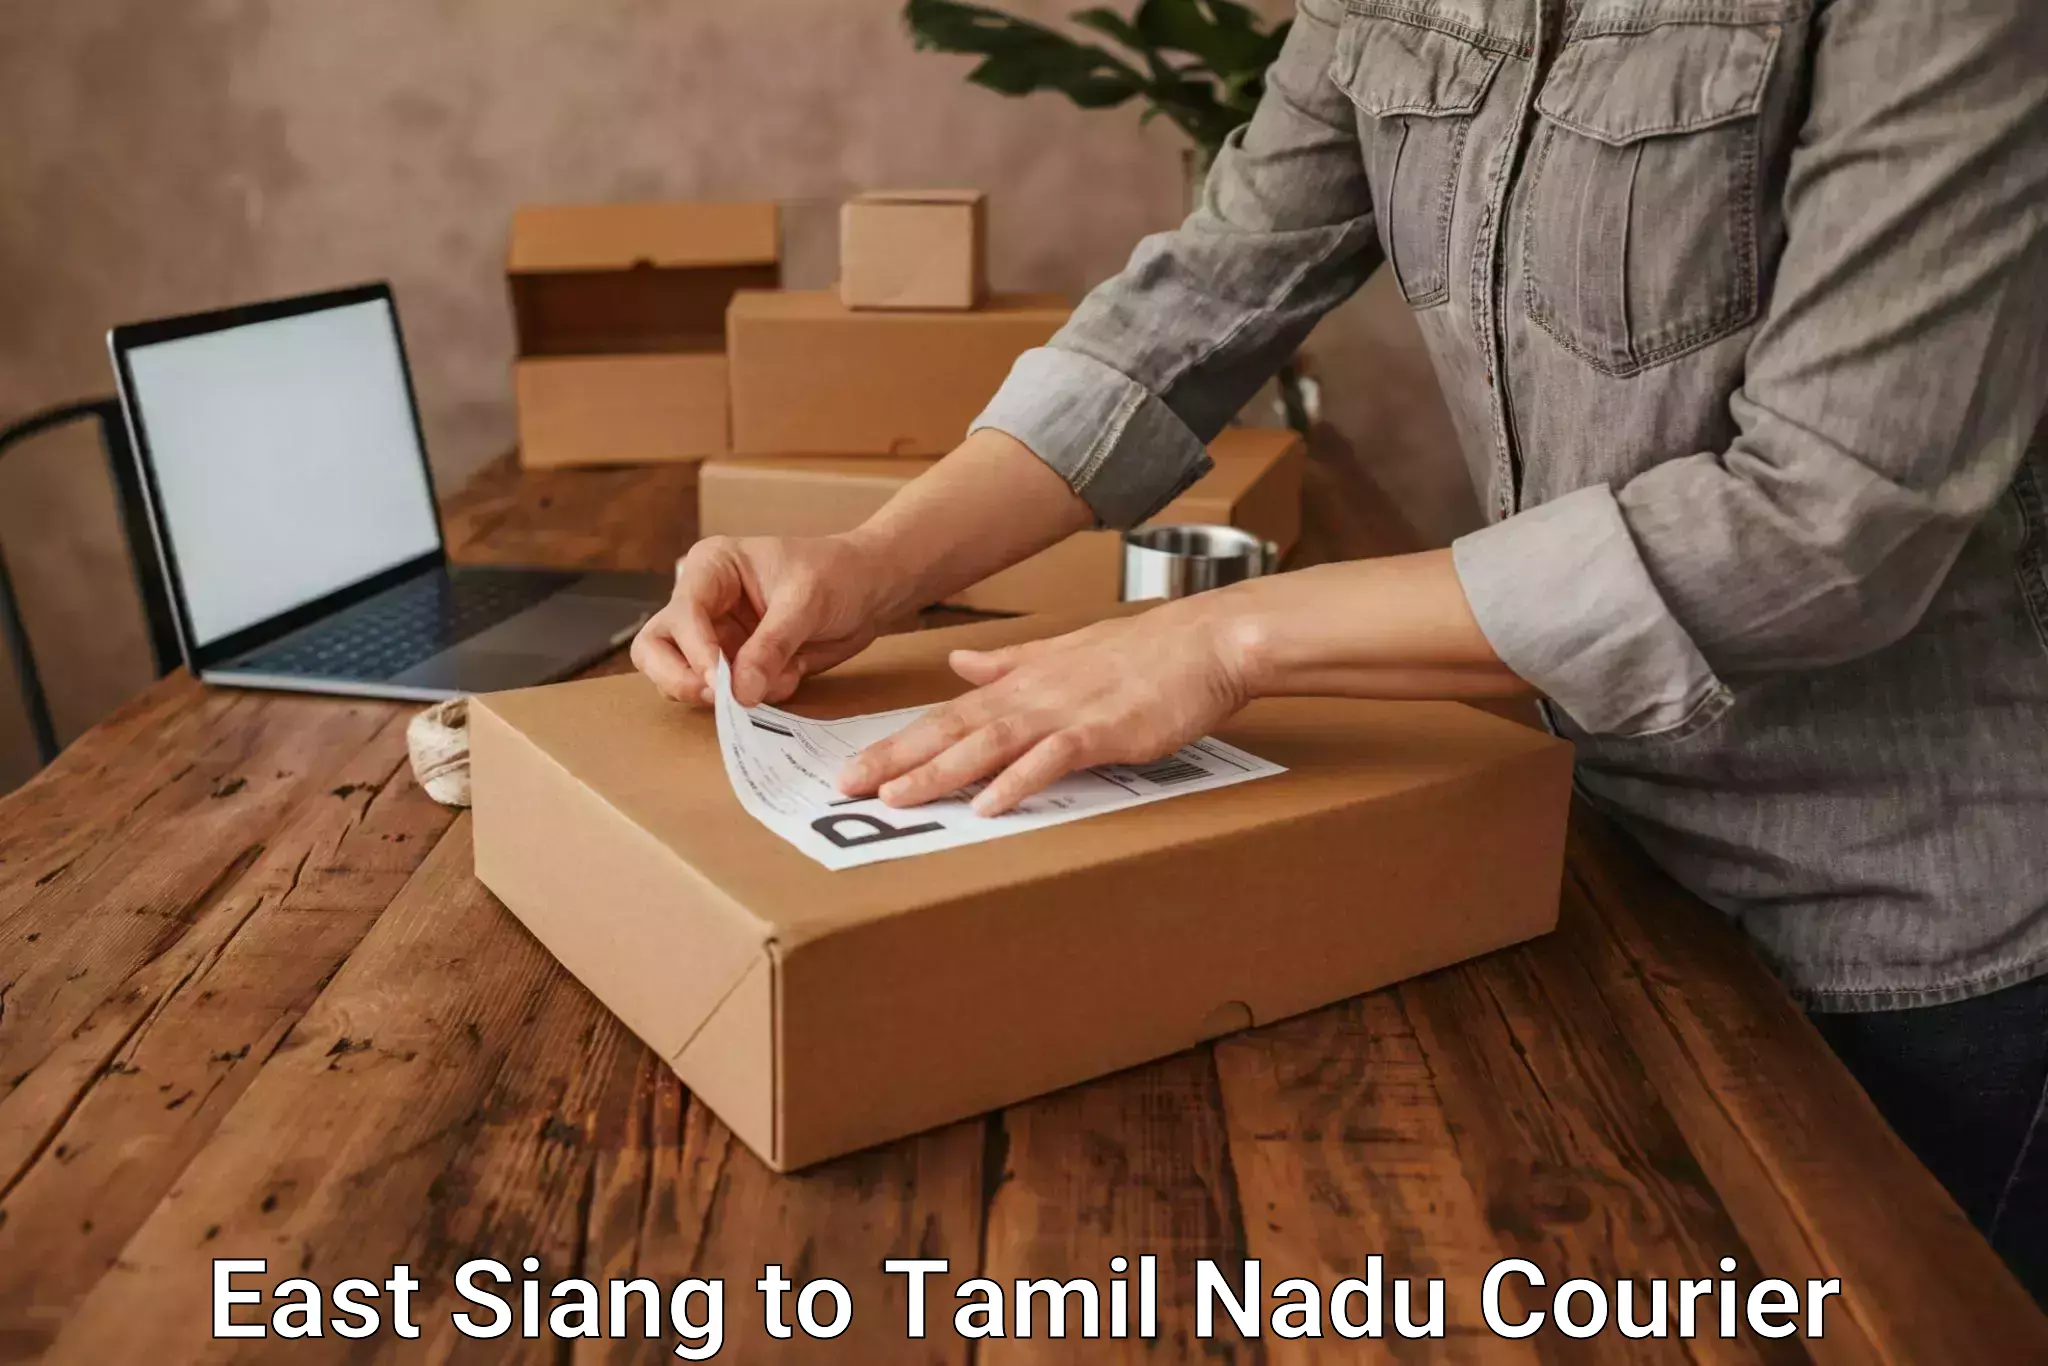 Customized shipping options East Siang to Manamelkudi